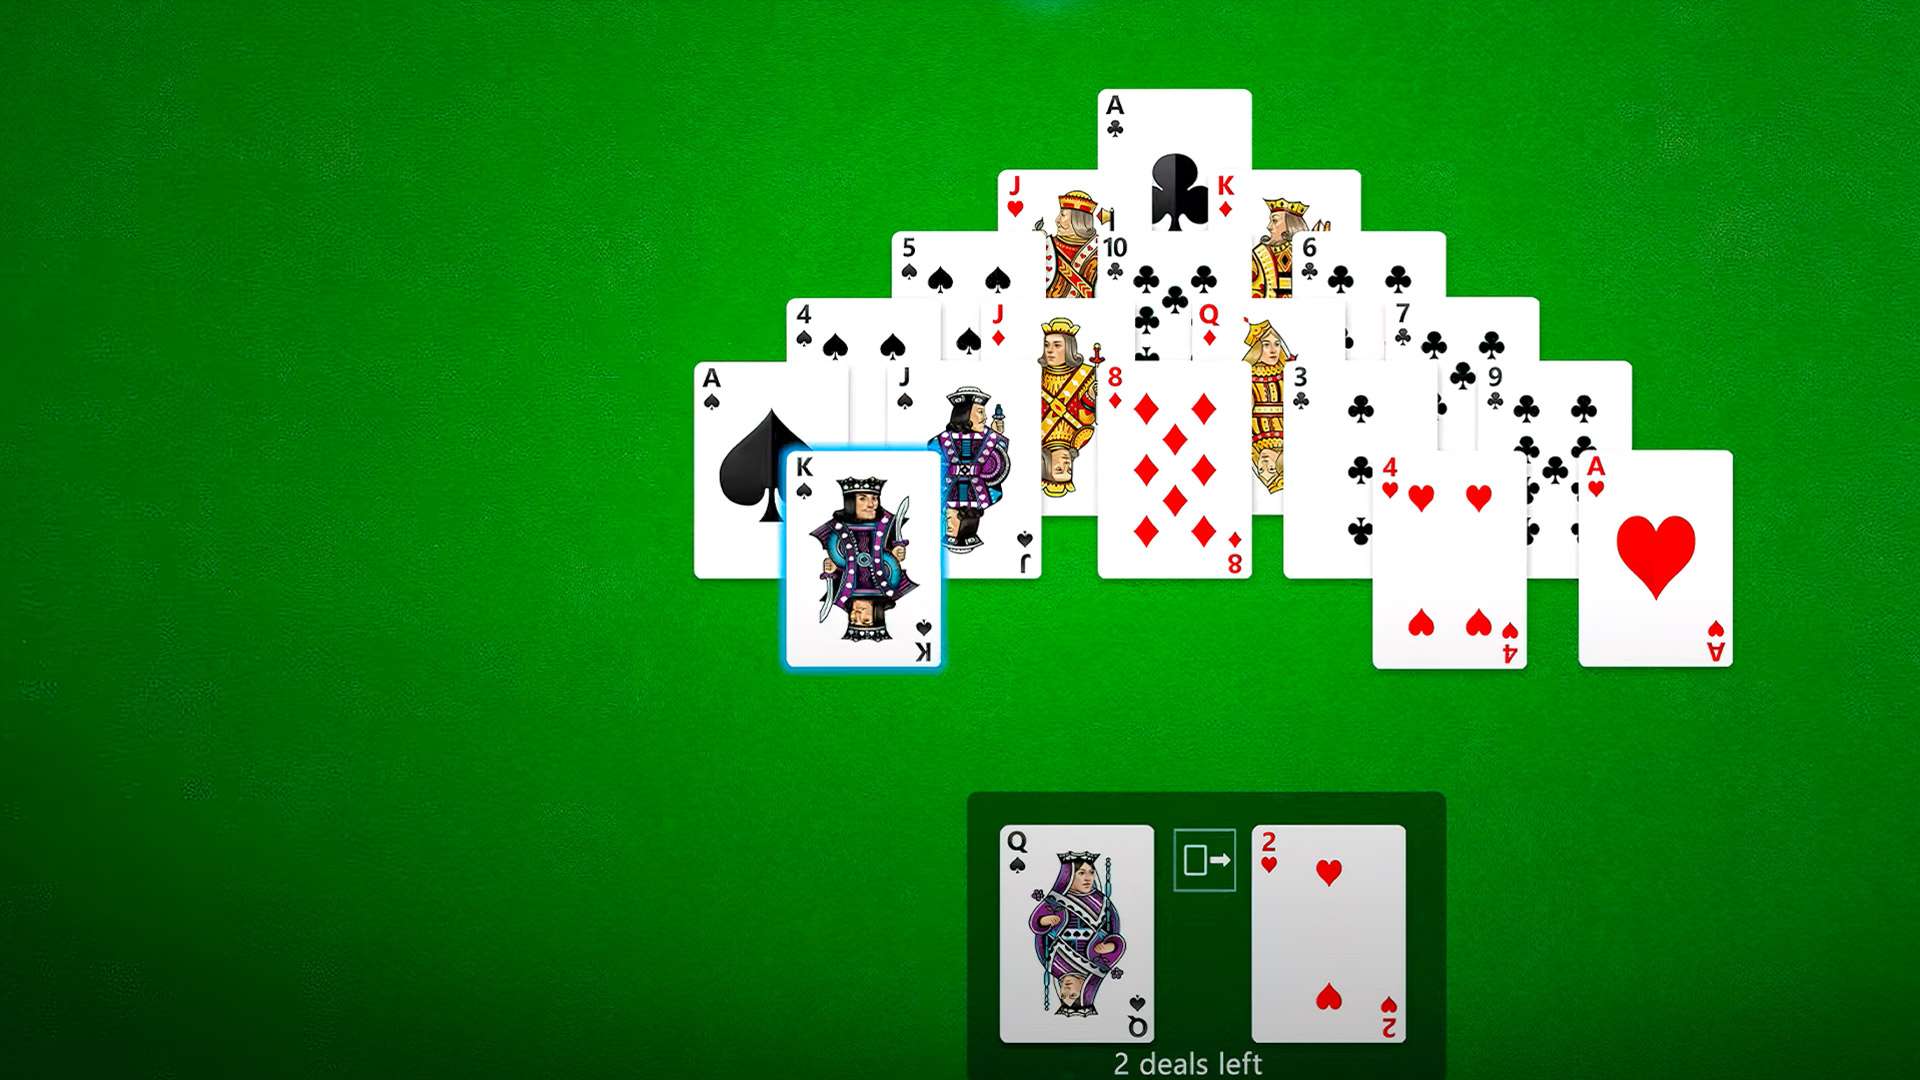 Download and Play Microsoft Solitaire Collection on PC & Mac